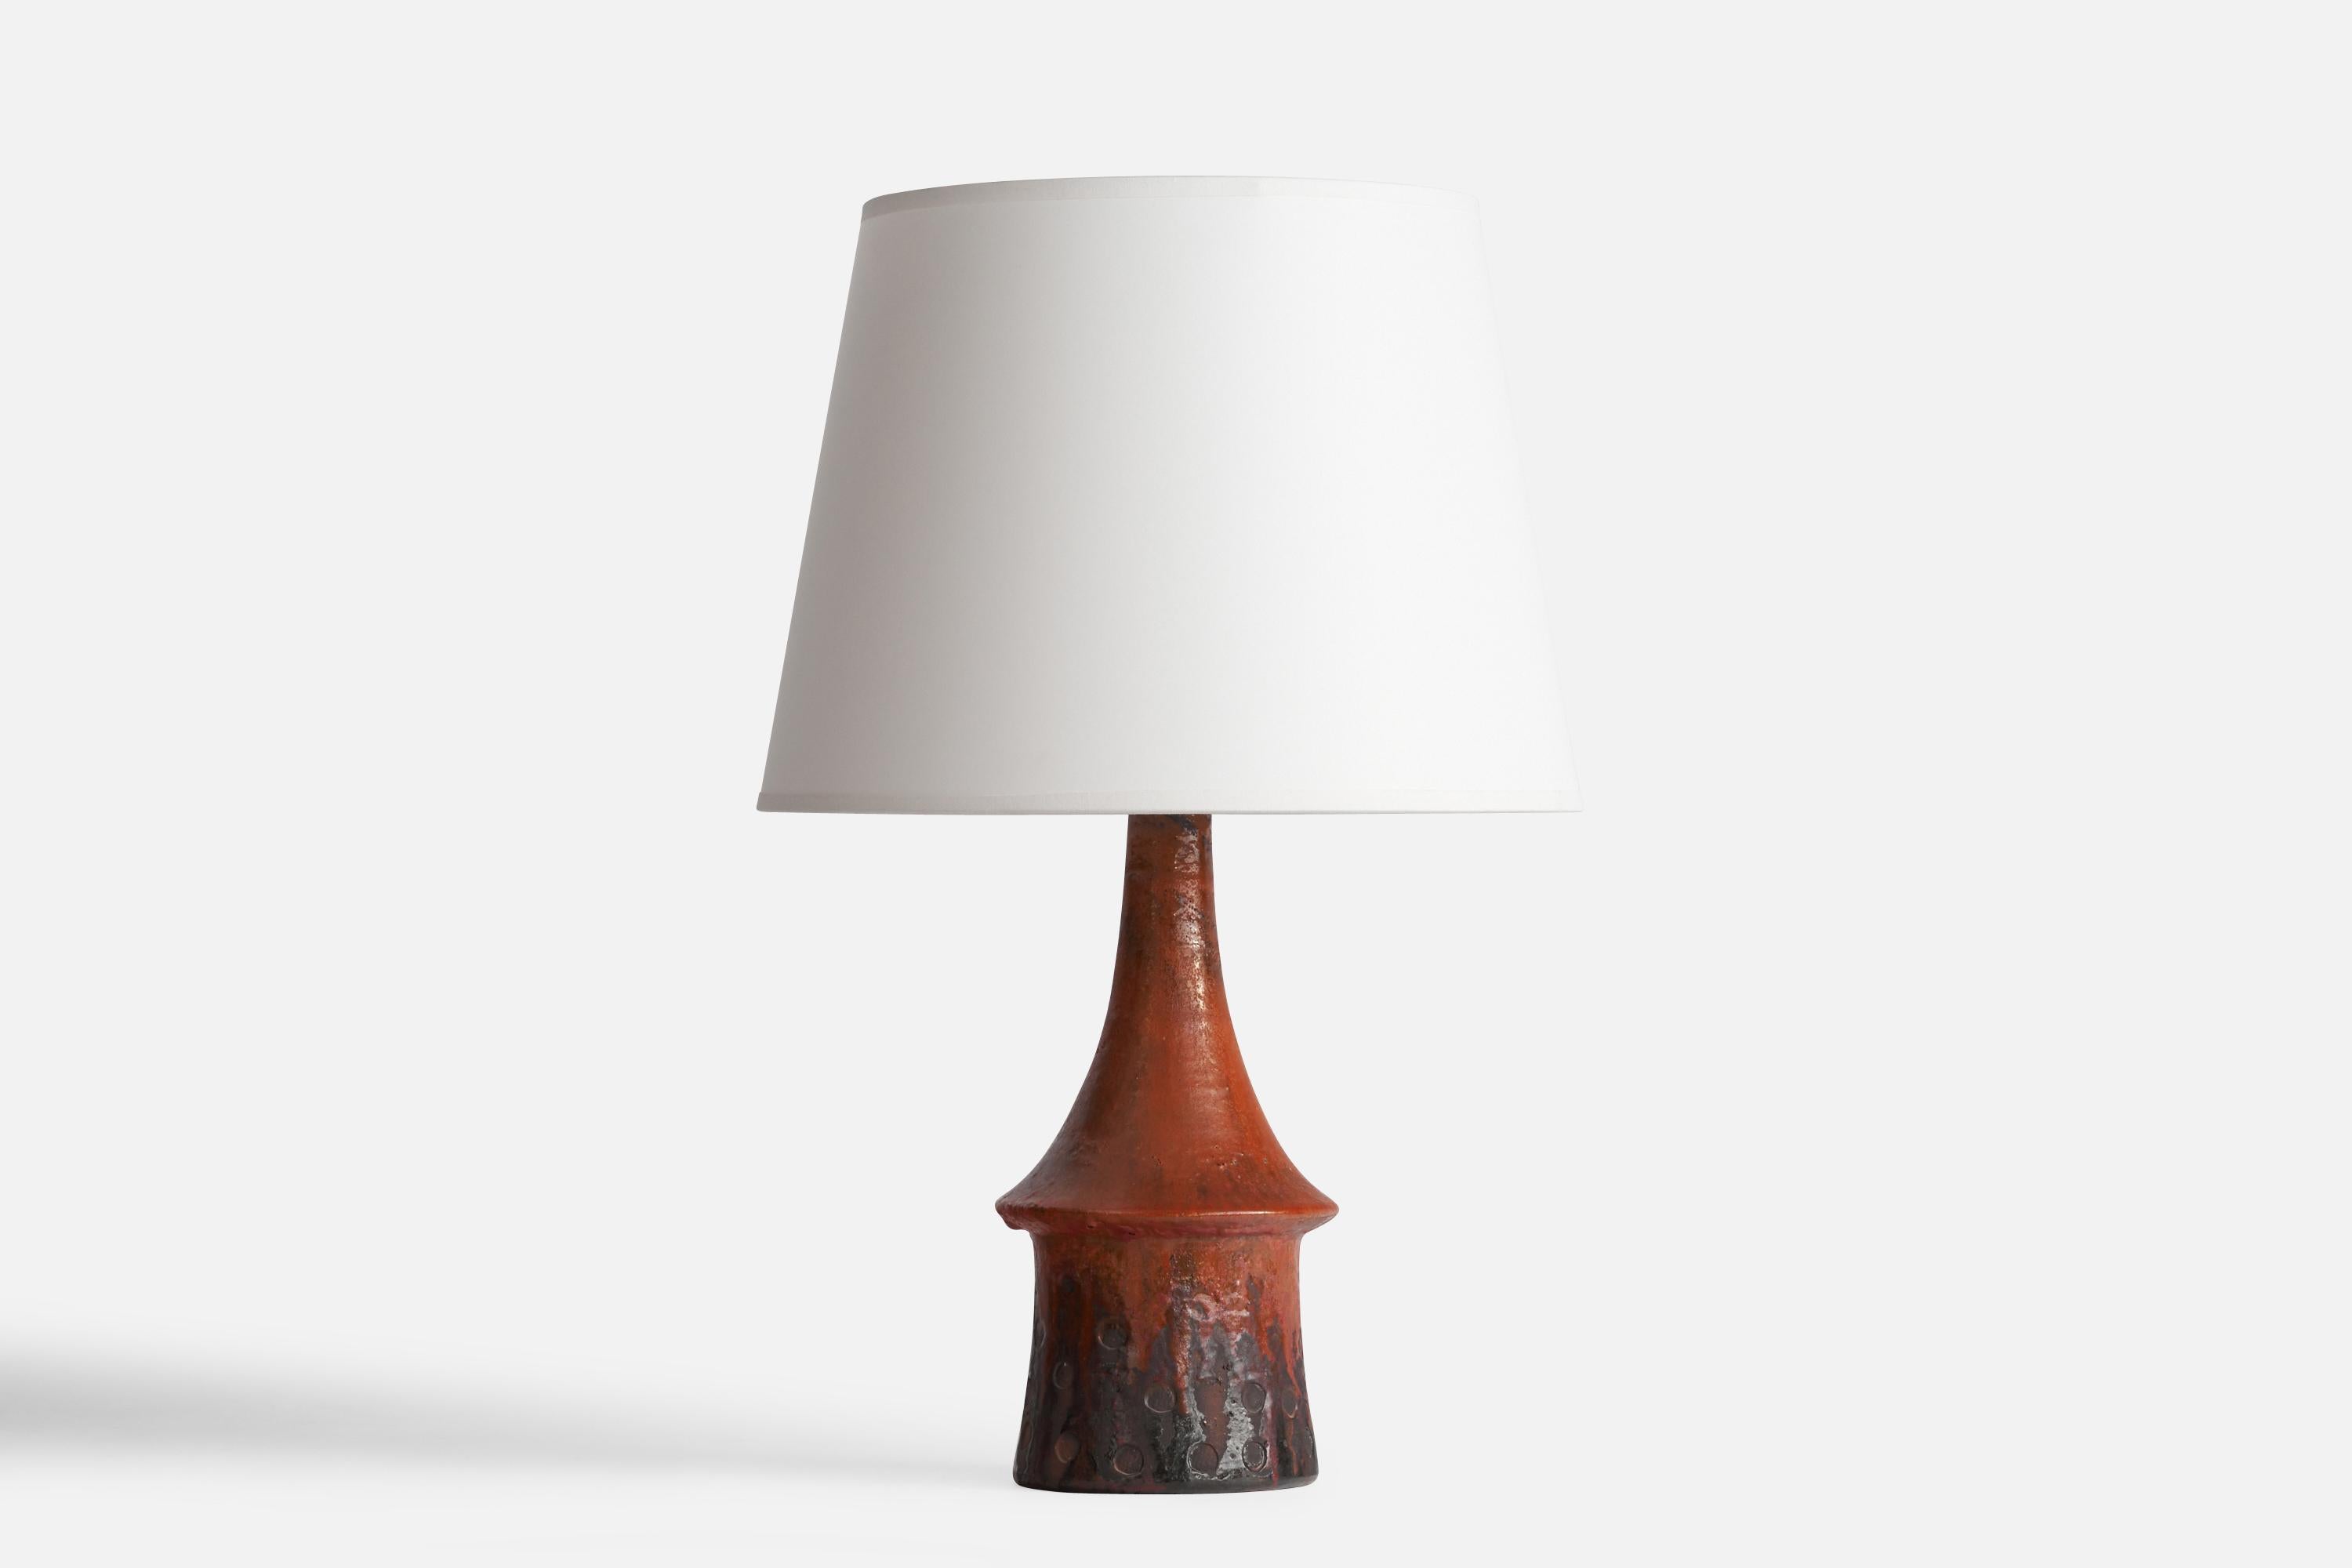 A red-glazed stoneware table lamp designed by Architect Børge Wernonch for Afta, Denmark, c. 1940s.

Dimensions of Lamp (inches): 13” H x 5”  Diameter
Dimensions of Shade (inches): 9” Top Diameter x 12” Bottom Diameter x 9” H
kDimensions of Lamp